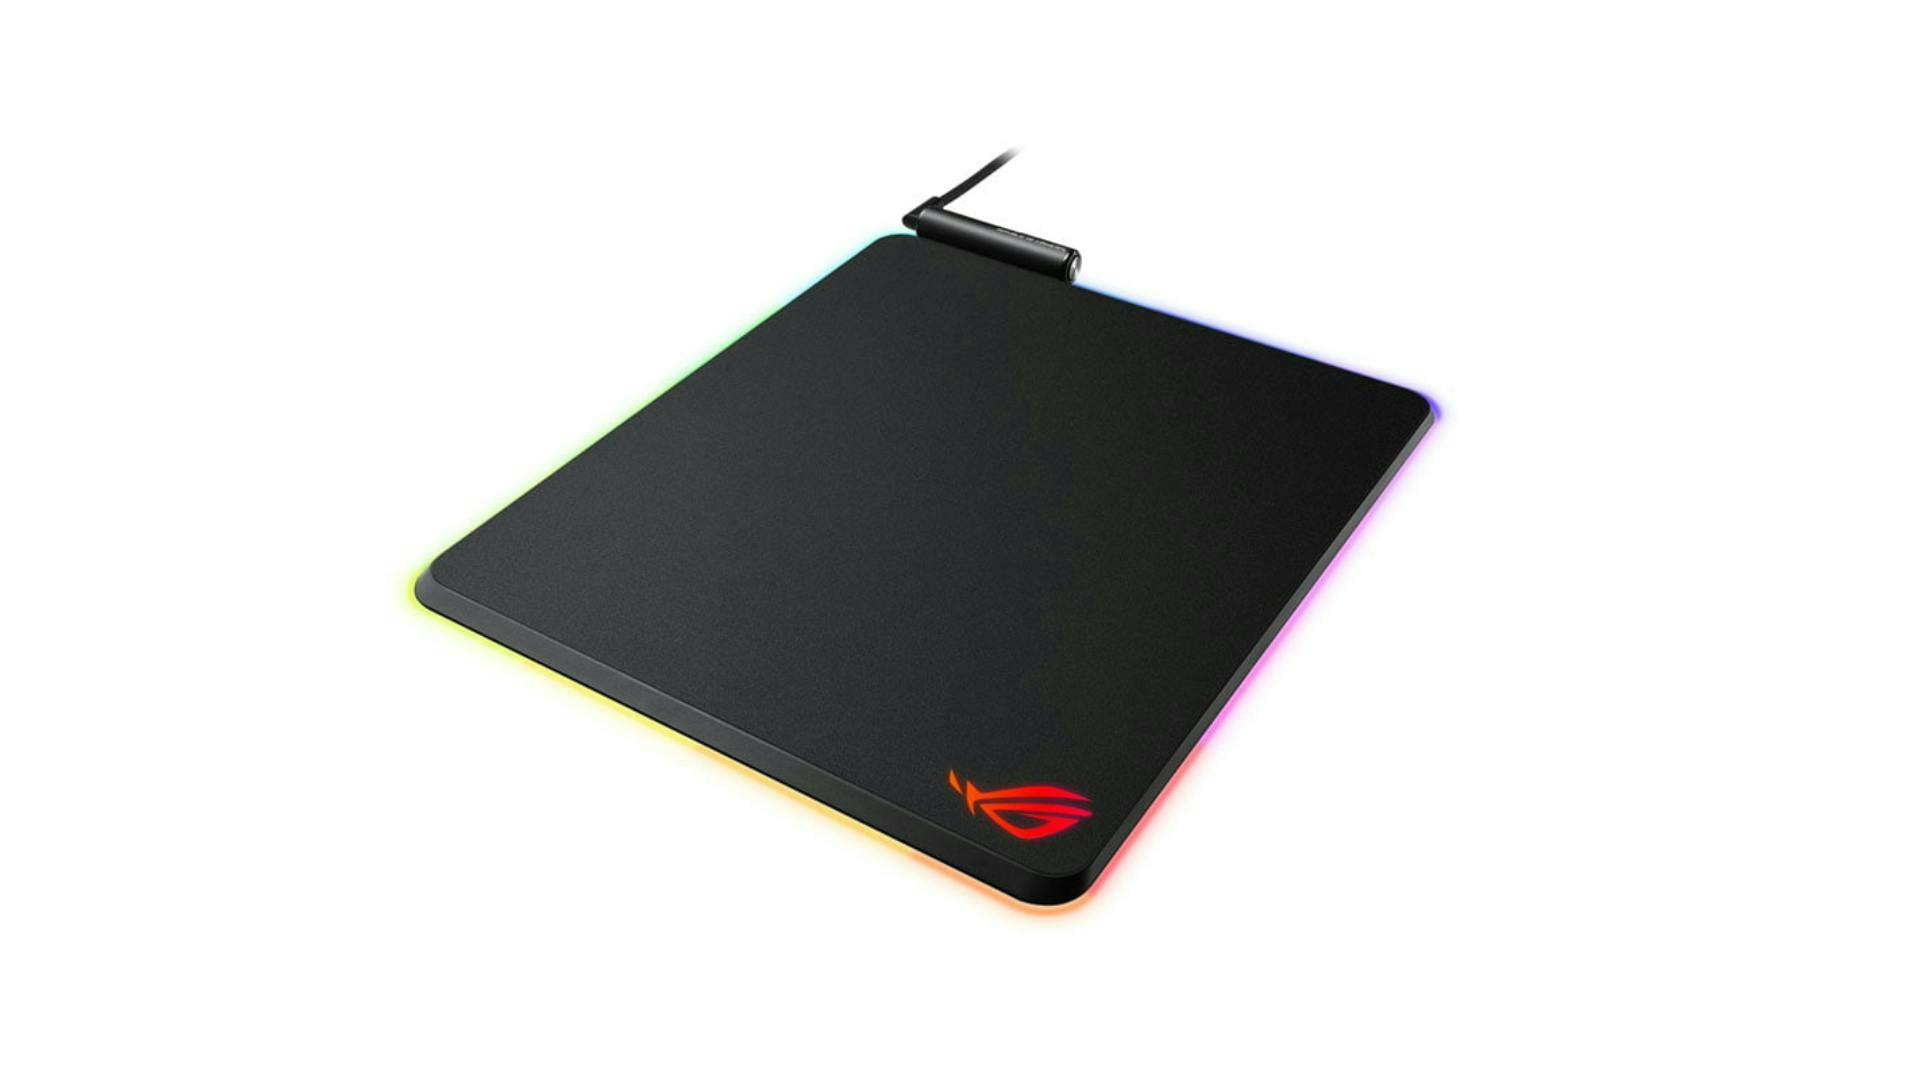 A hard plastic gaming mouse pad with RGB lighting. | Credit: CaseKing.